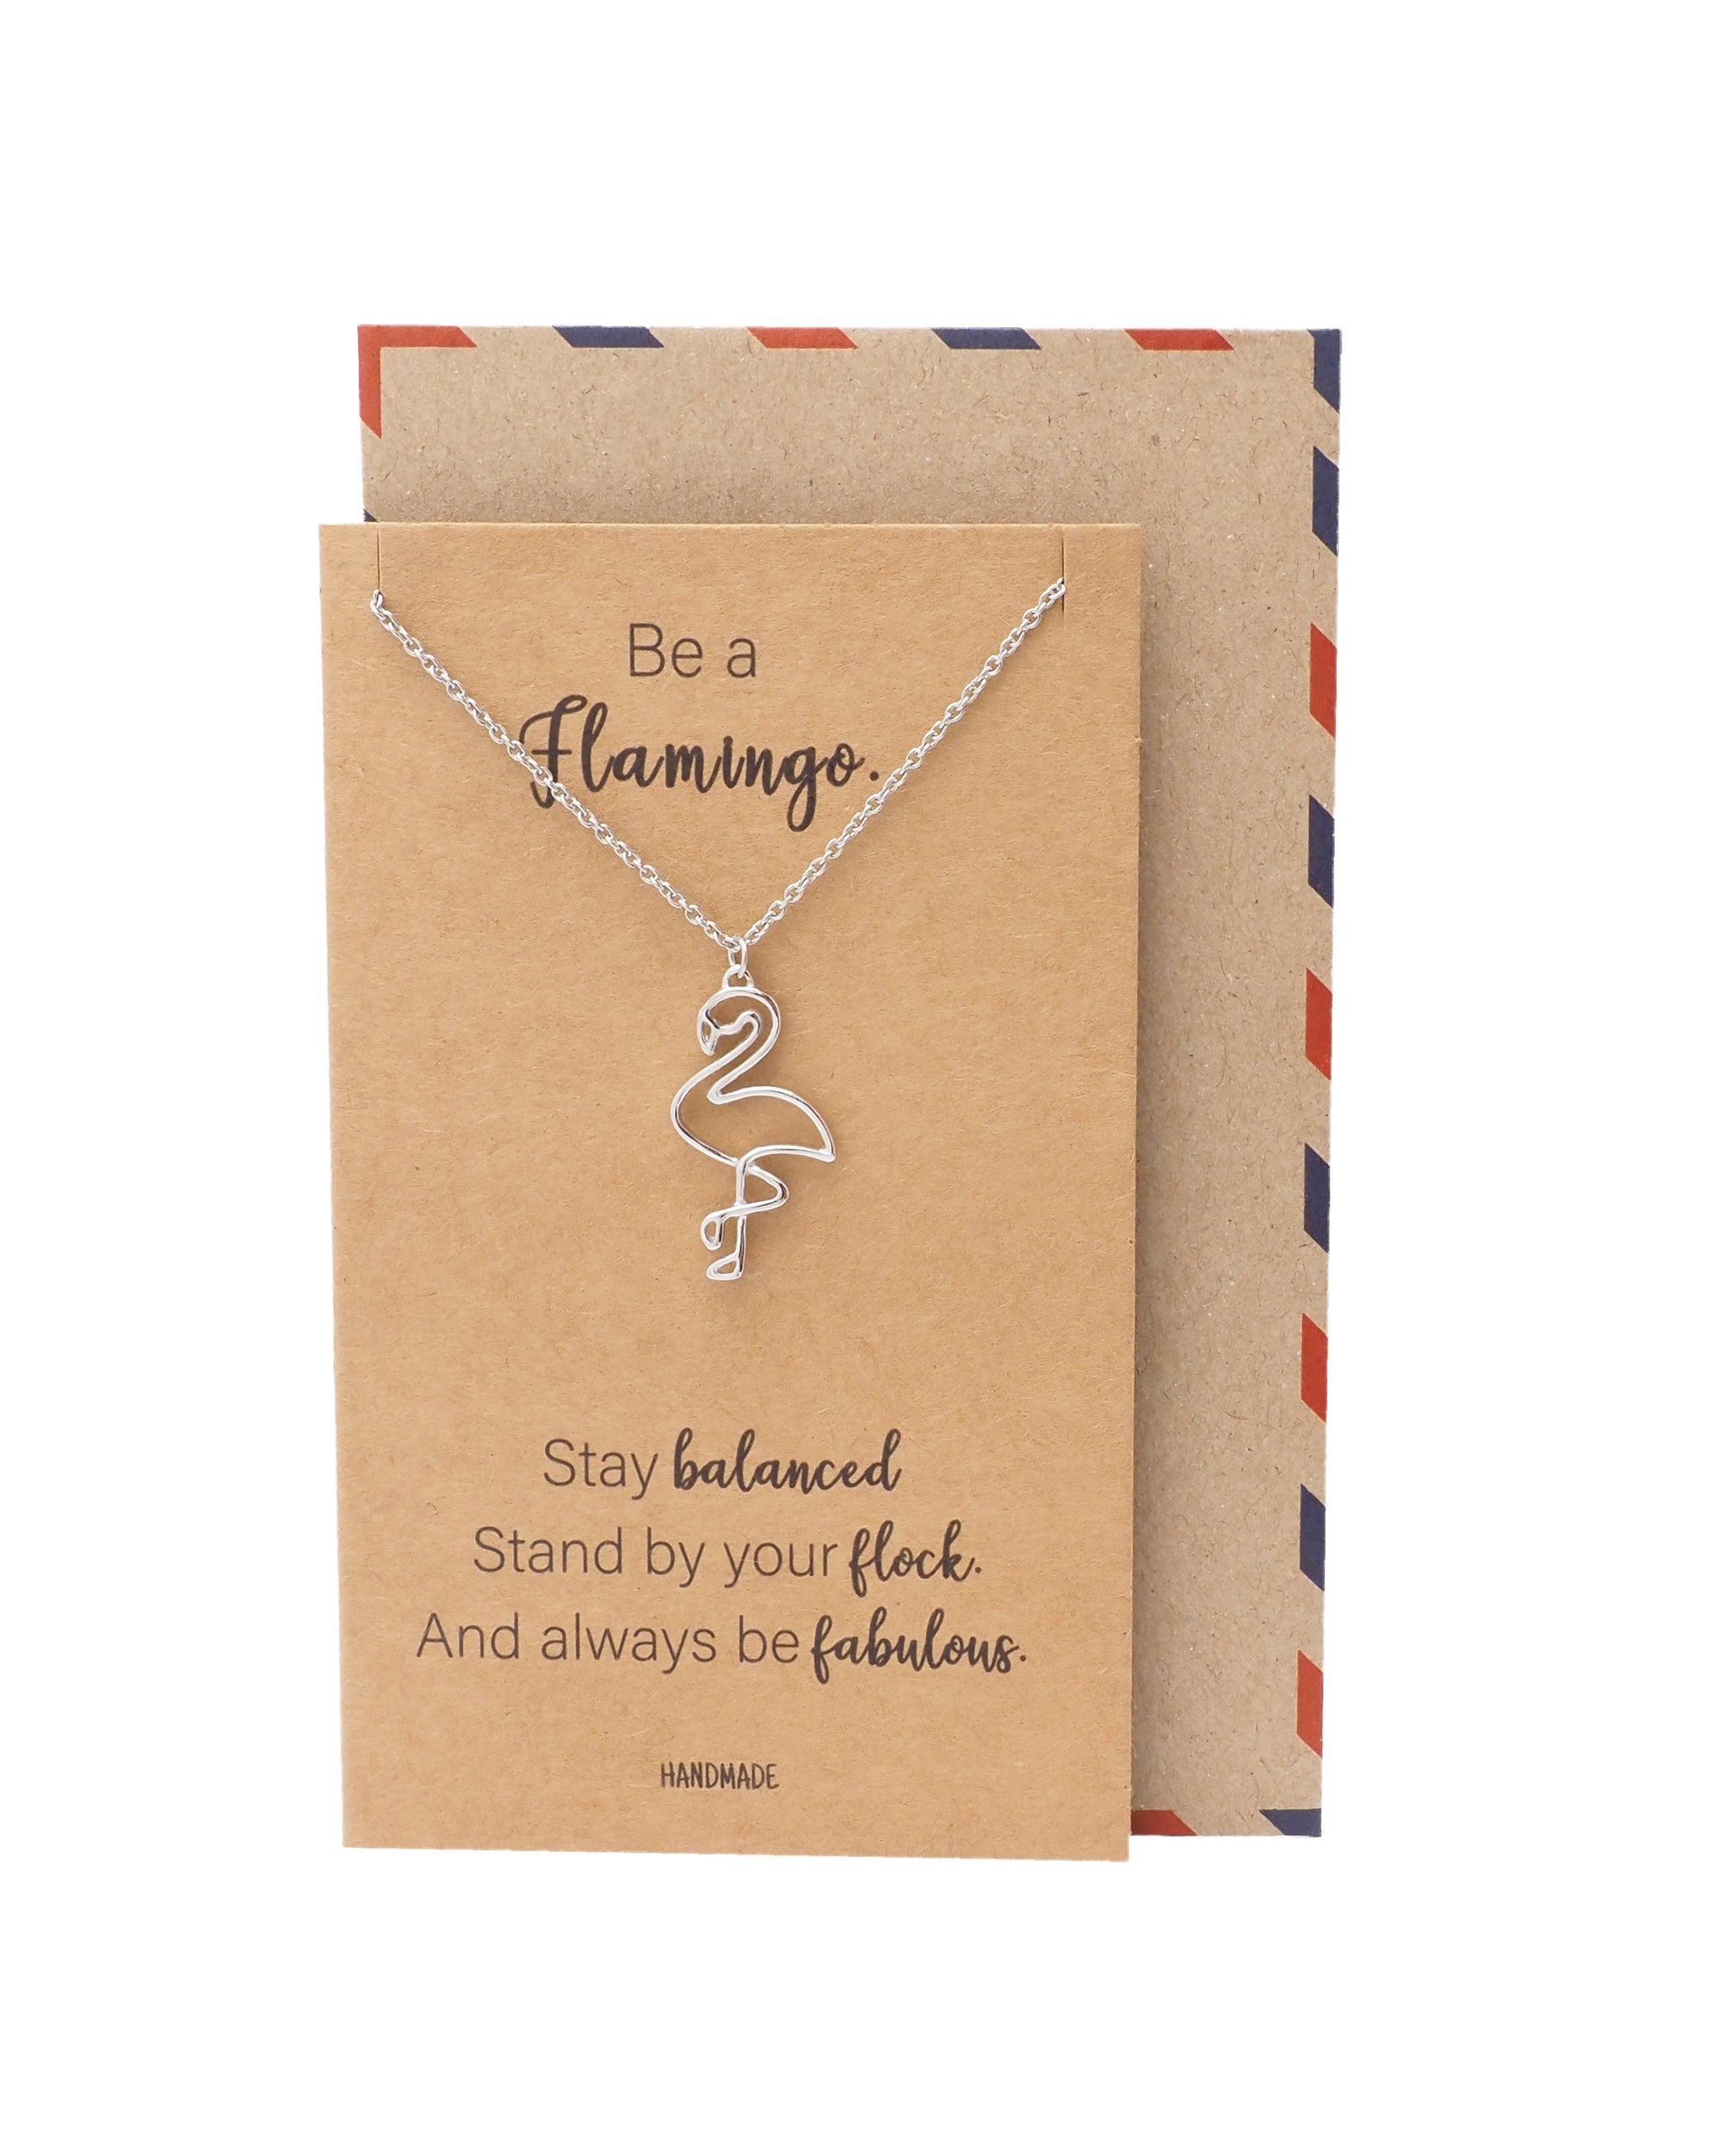 Belva Flamingo Pendant Necklace, Gifts for Women with Inspirational Quote on Greeting Card